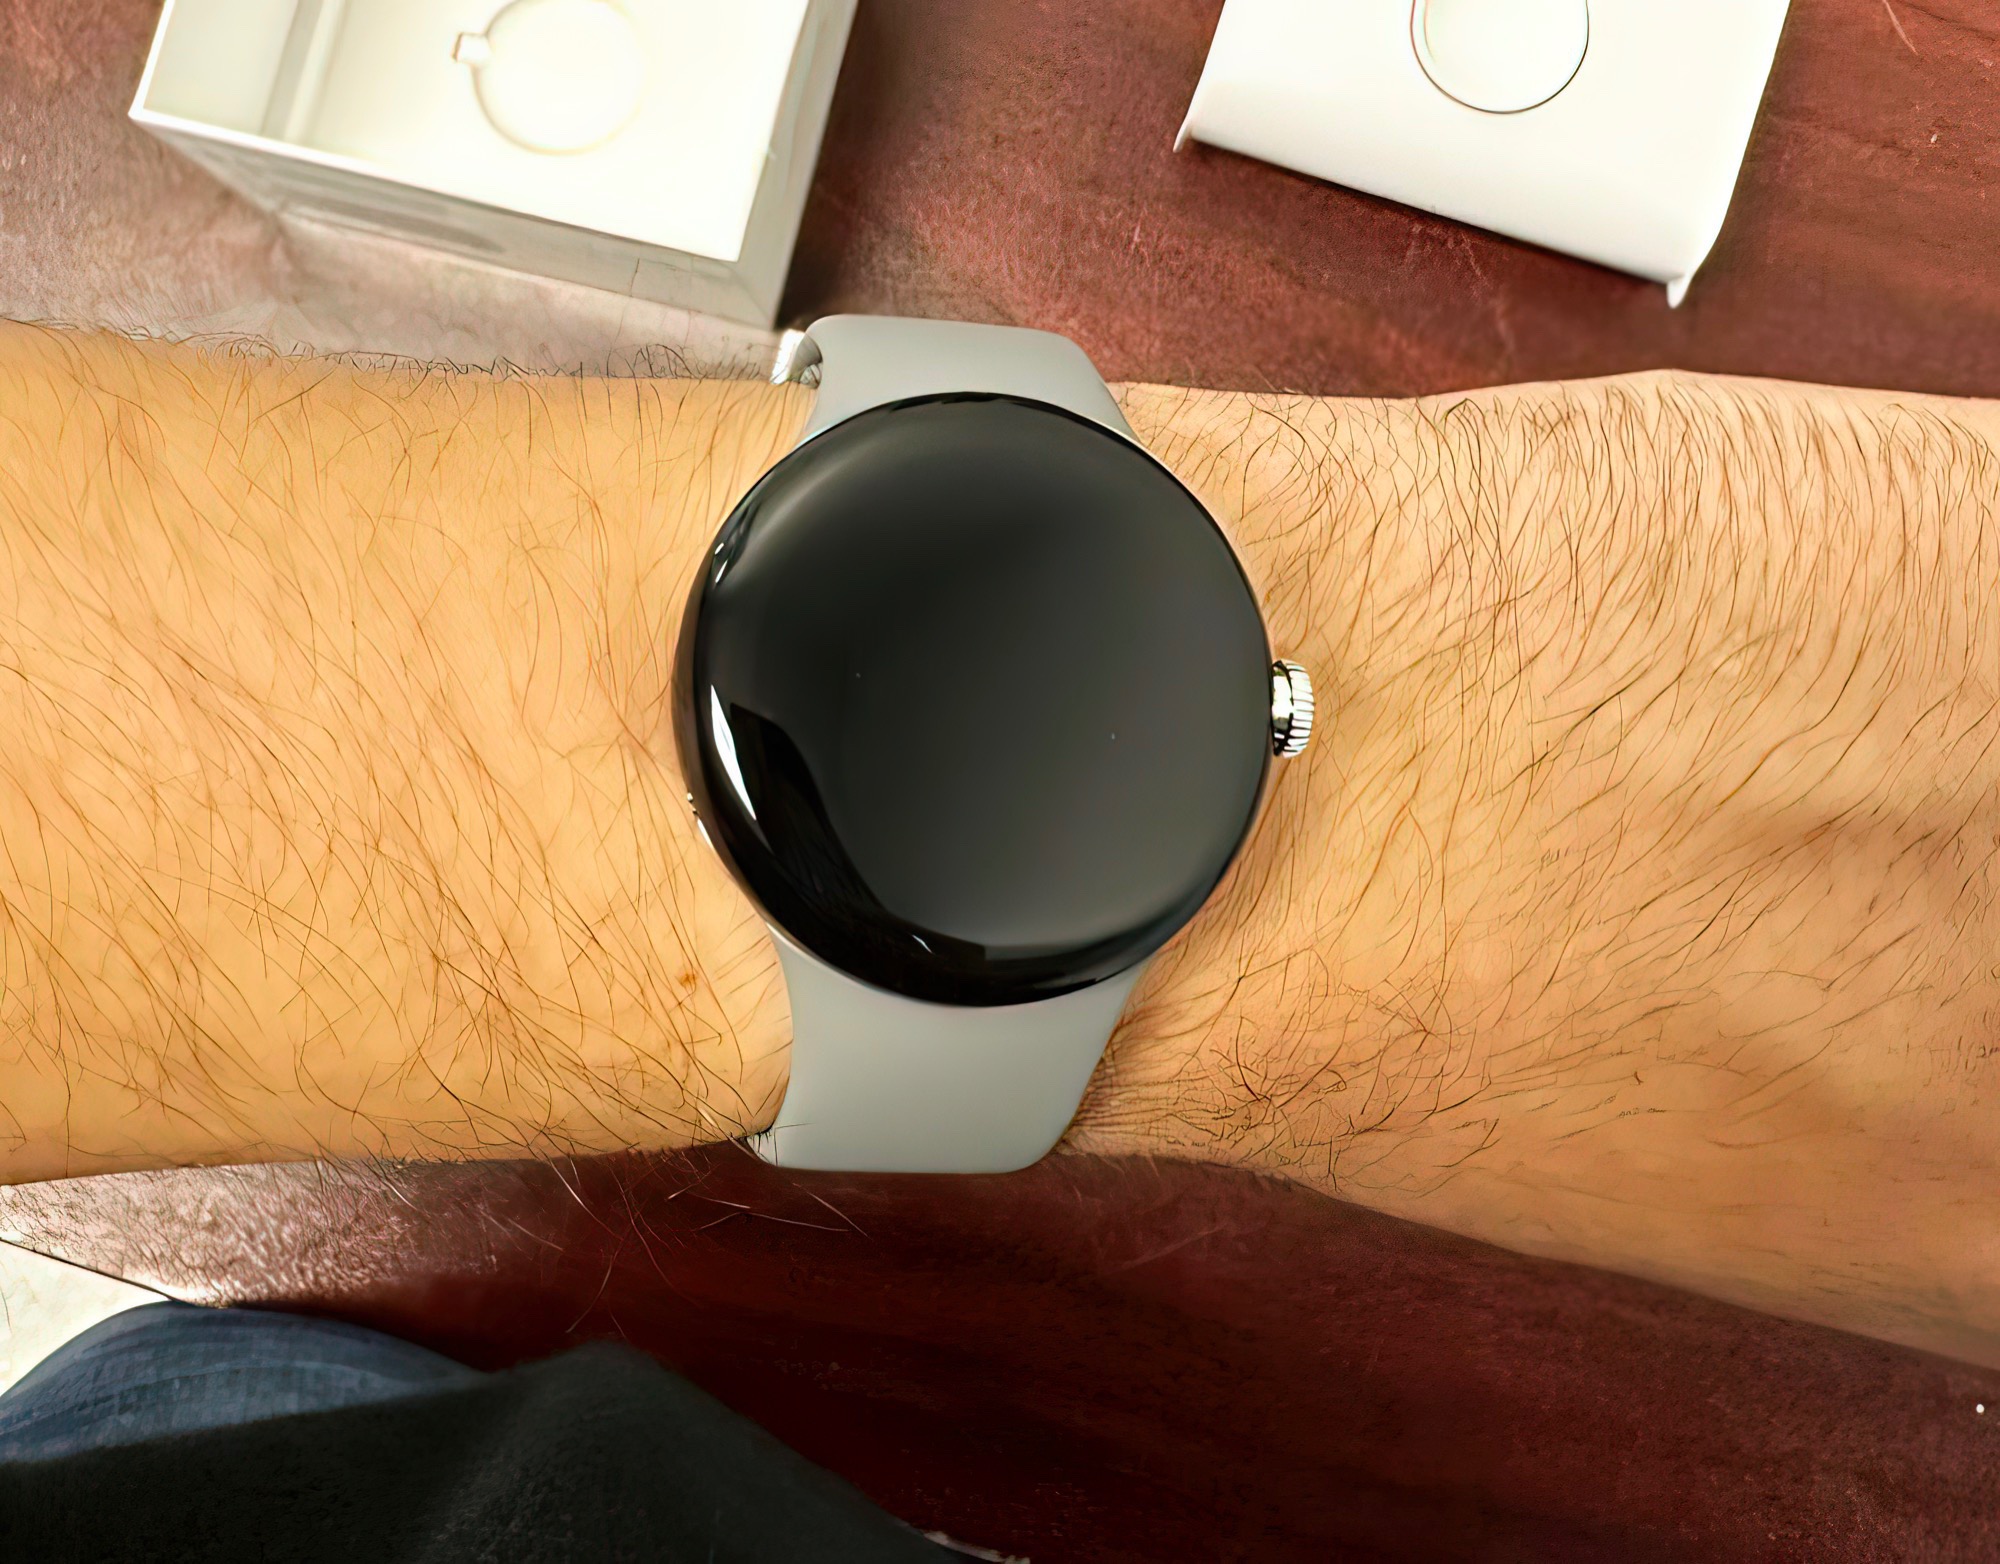 show Pixel thick Google photos bezels leak display band prices as Watch: NotebookCheck.net Unboxing - watch News